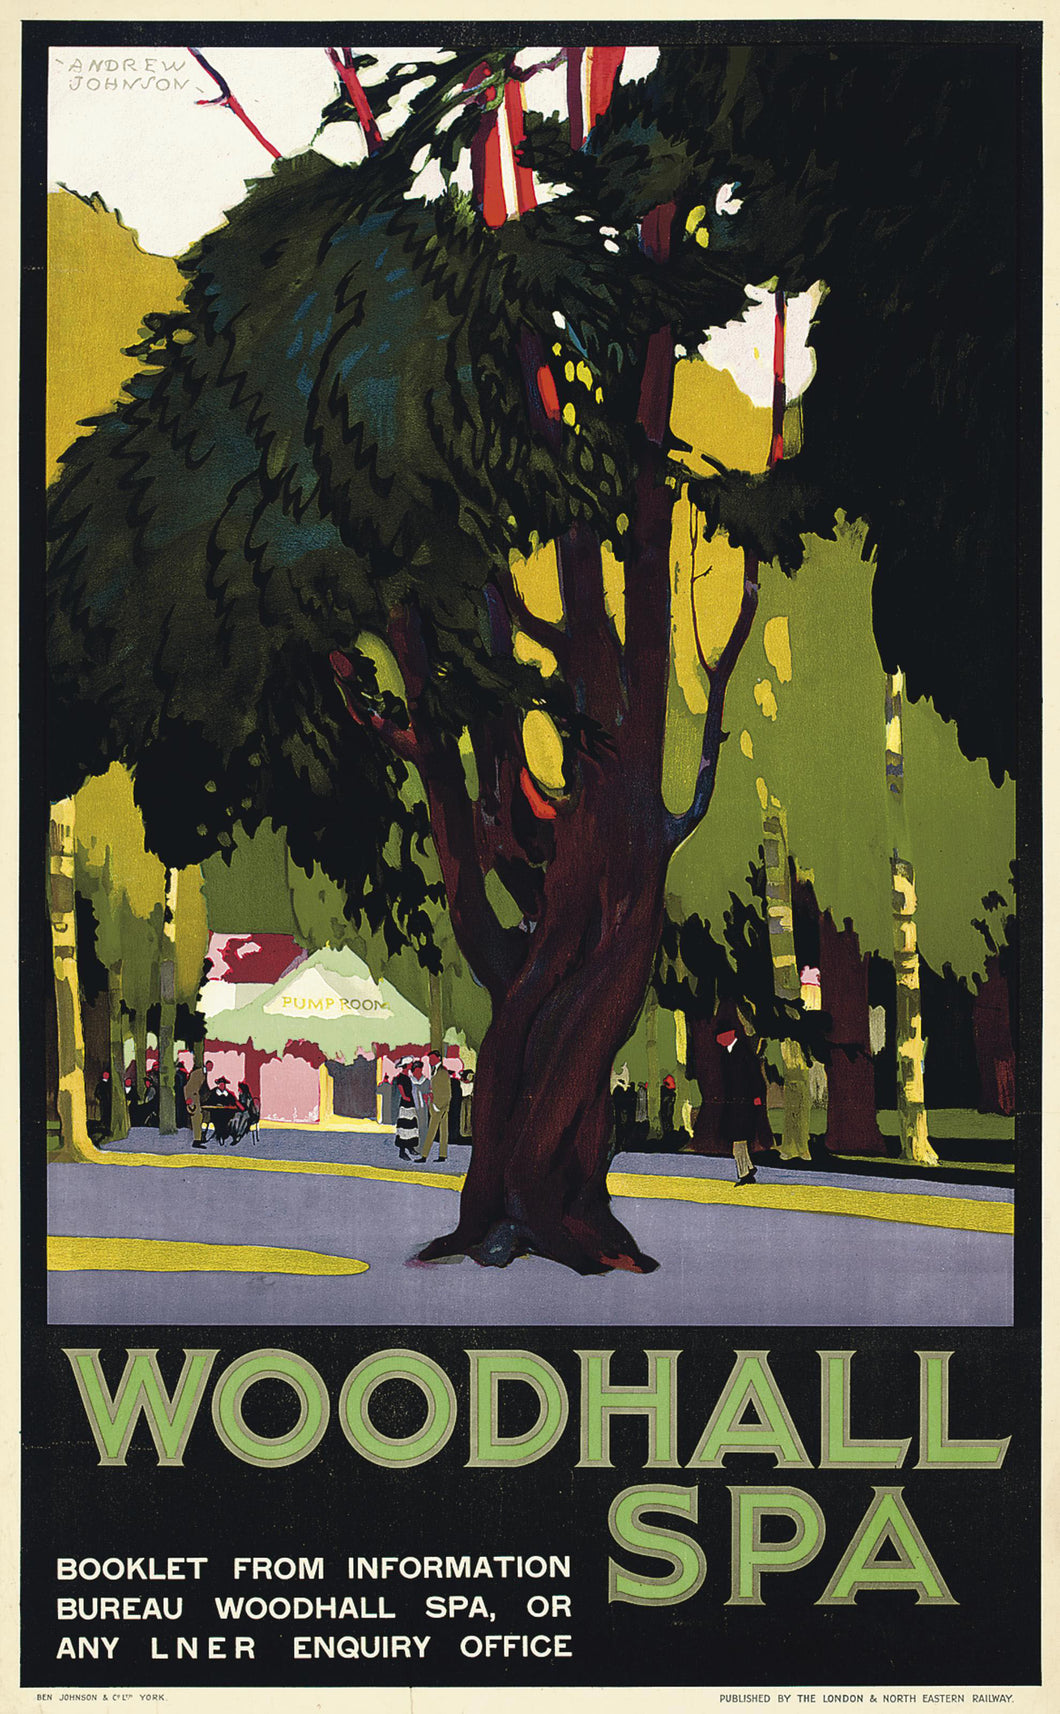 Vintage LNER Woodhall Spa Railway Poster A3/A4